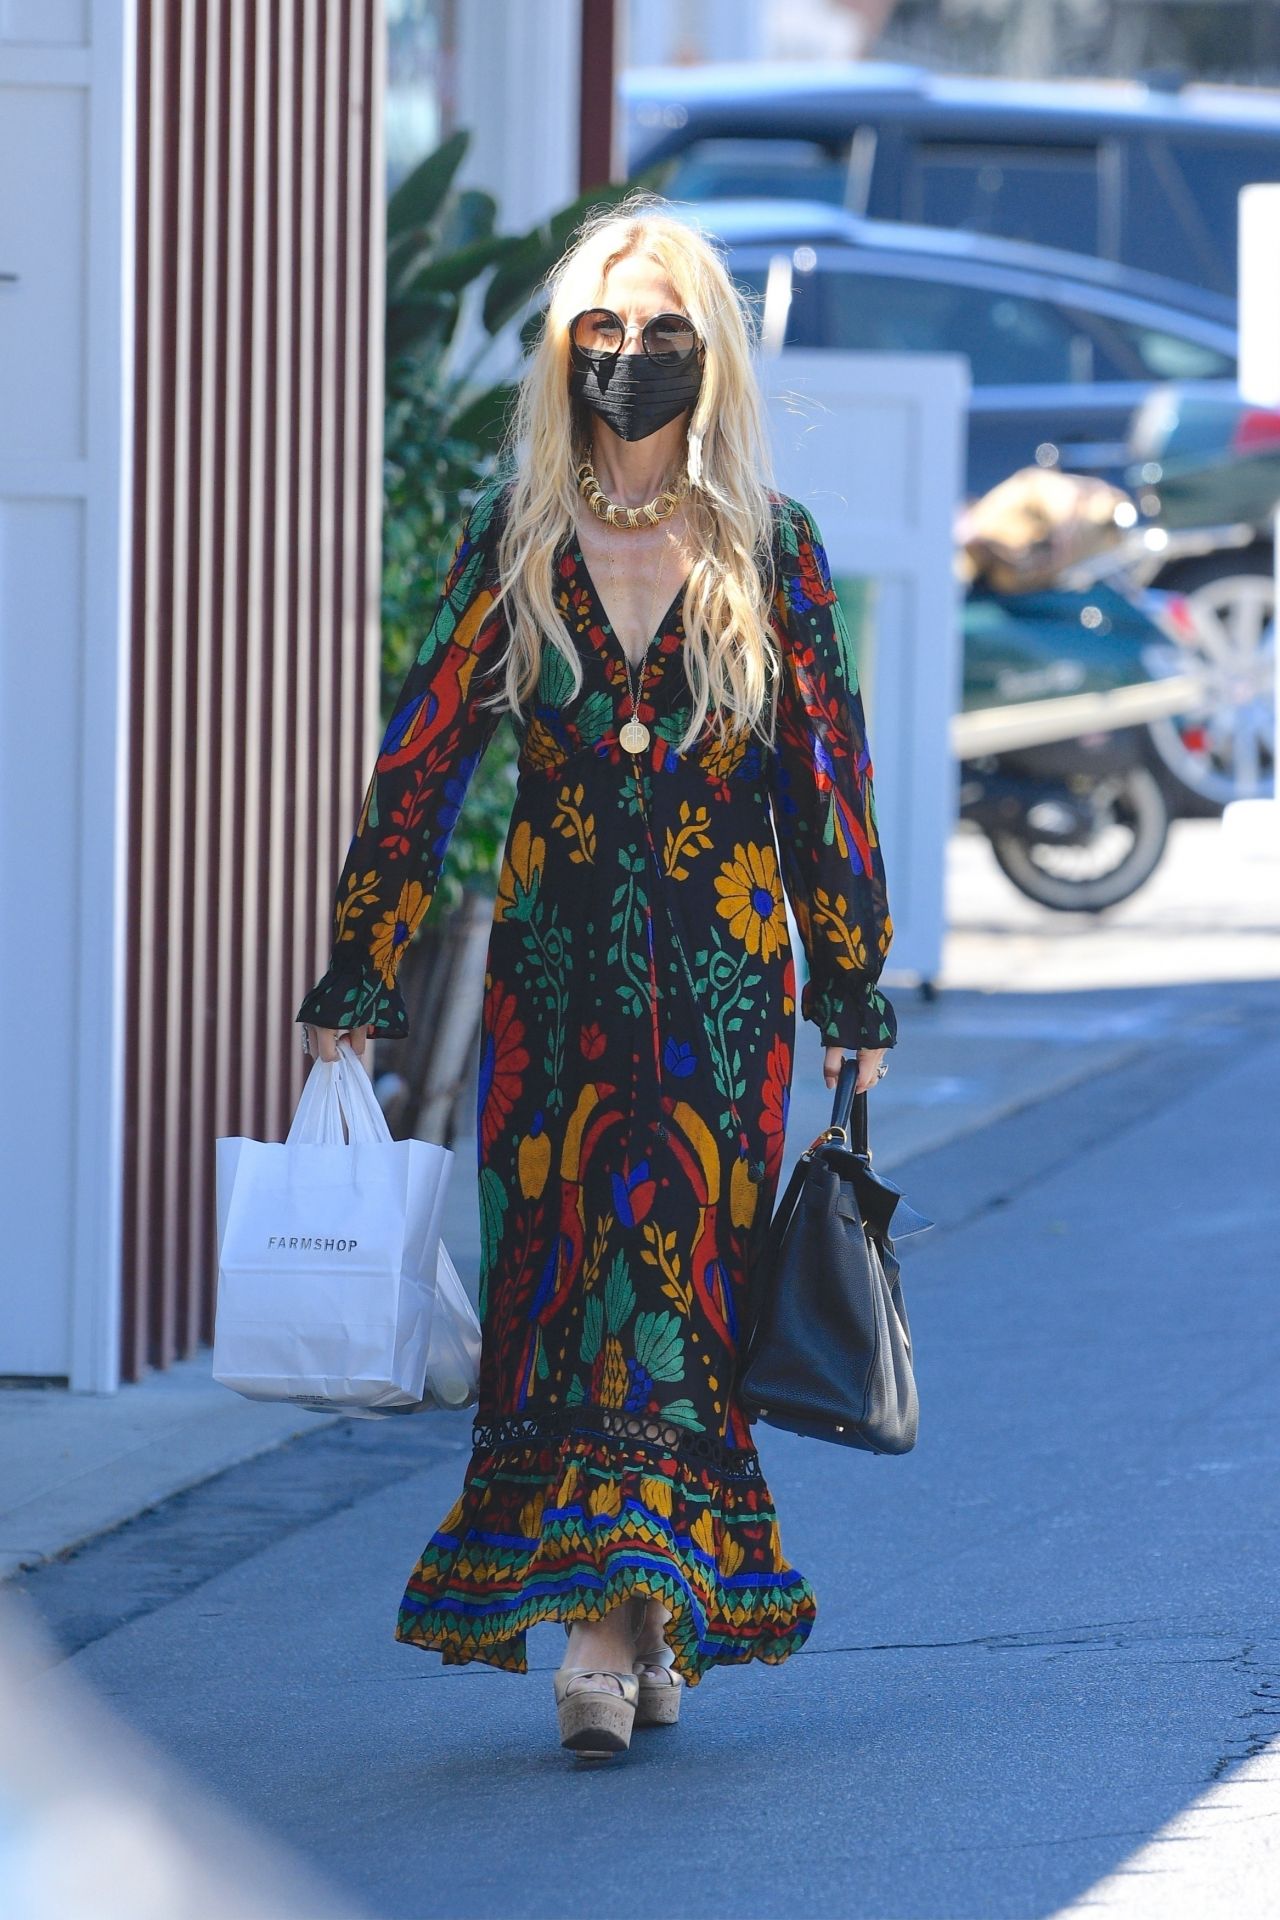 Rachel Zoe Wears A Colorful Maxi Dress Shopping At The Brentwood Country Mart 09 04 2021 4 